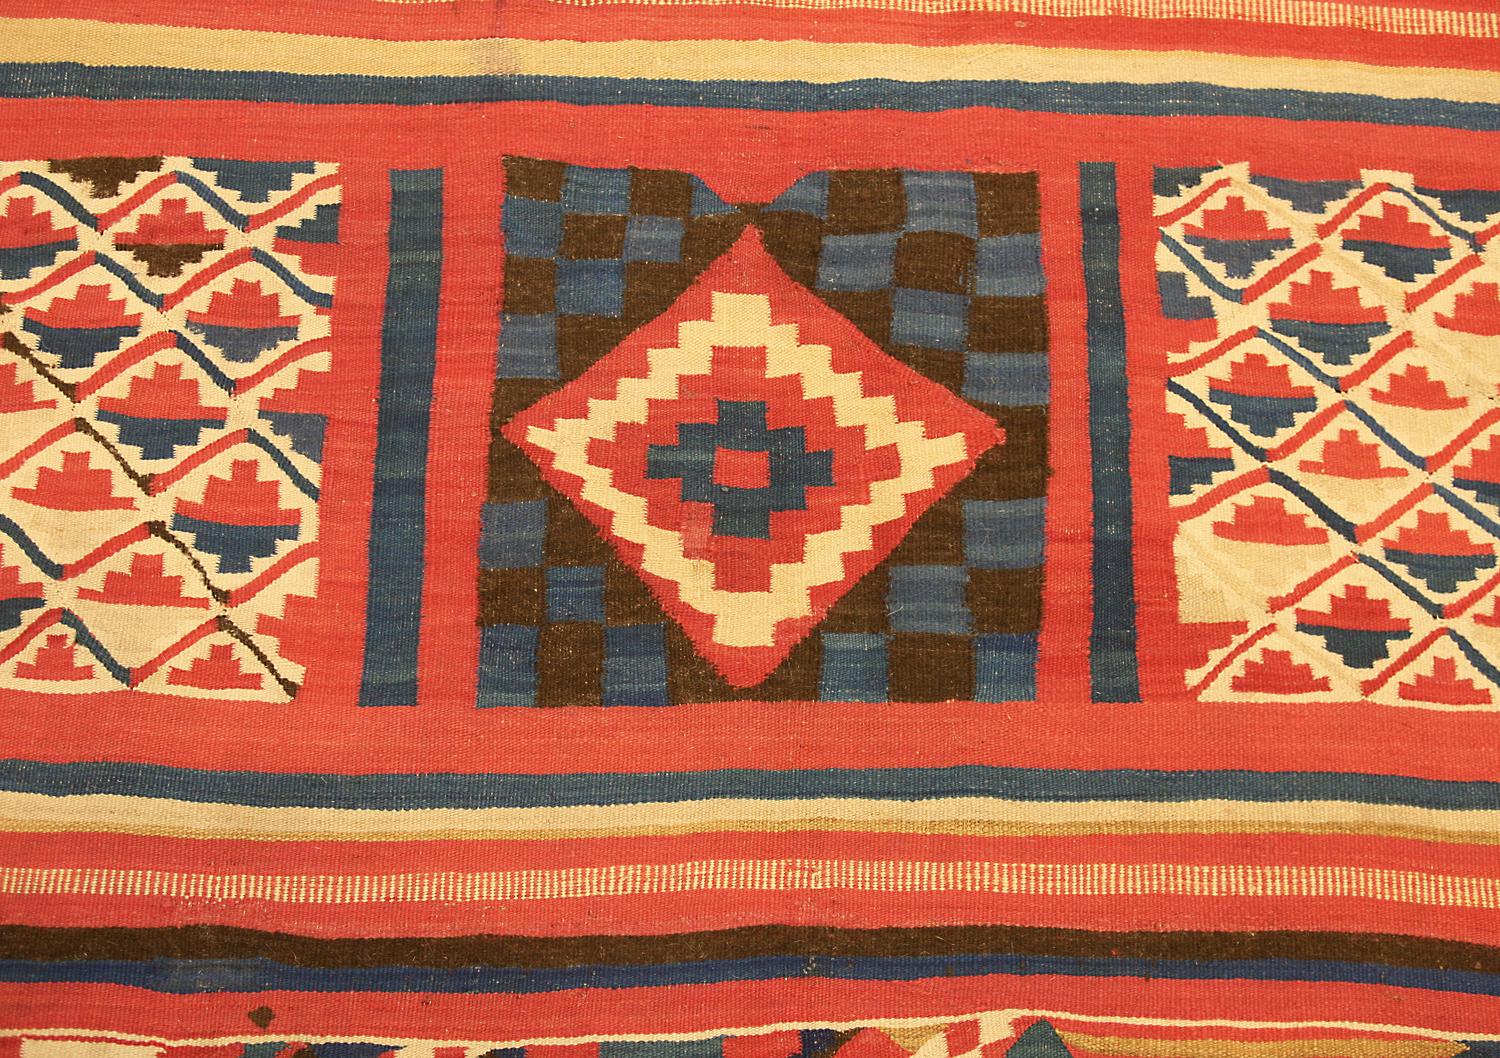 This is an antique Gafsa Tunisian kilim woven during the end of the 19th century circa 1900 and measures 220 x 185 cm in size. This textile is designed with rows of polychrome geometric motifs including arrows, abstract camels and, medallions all